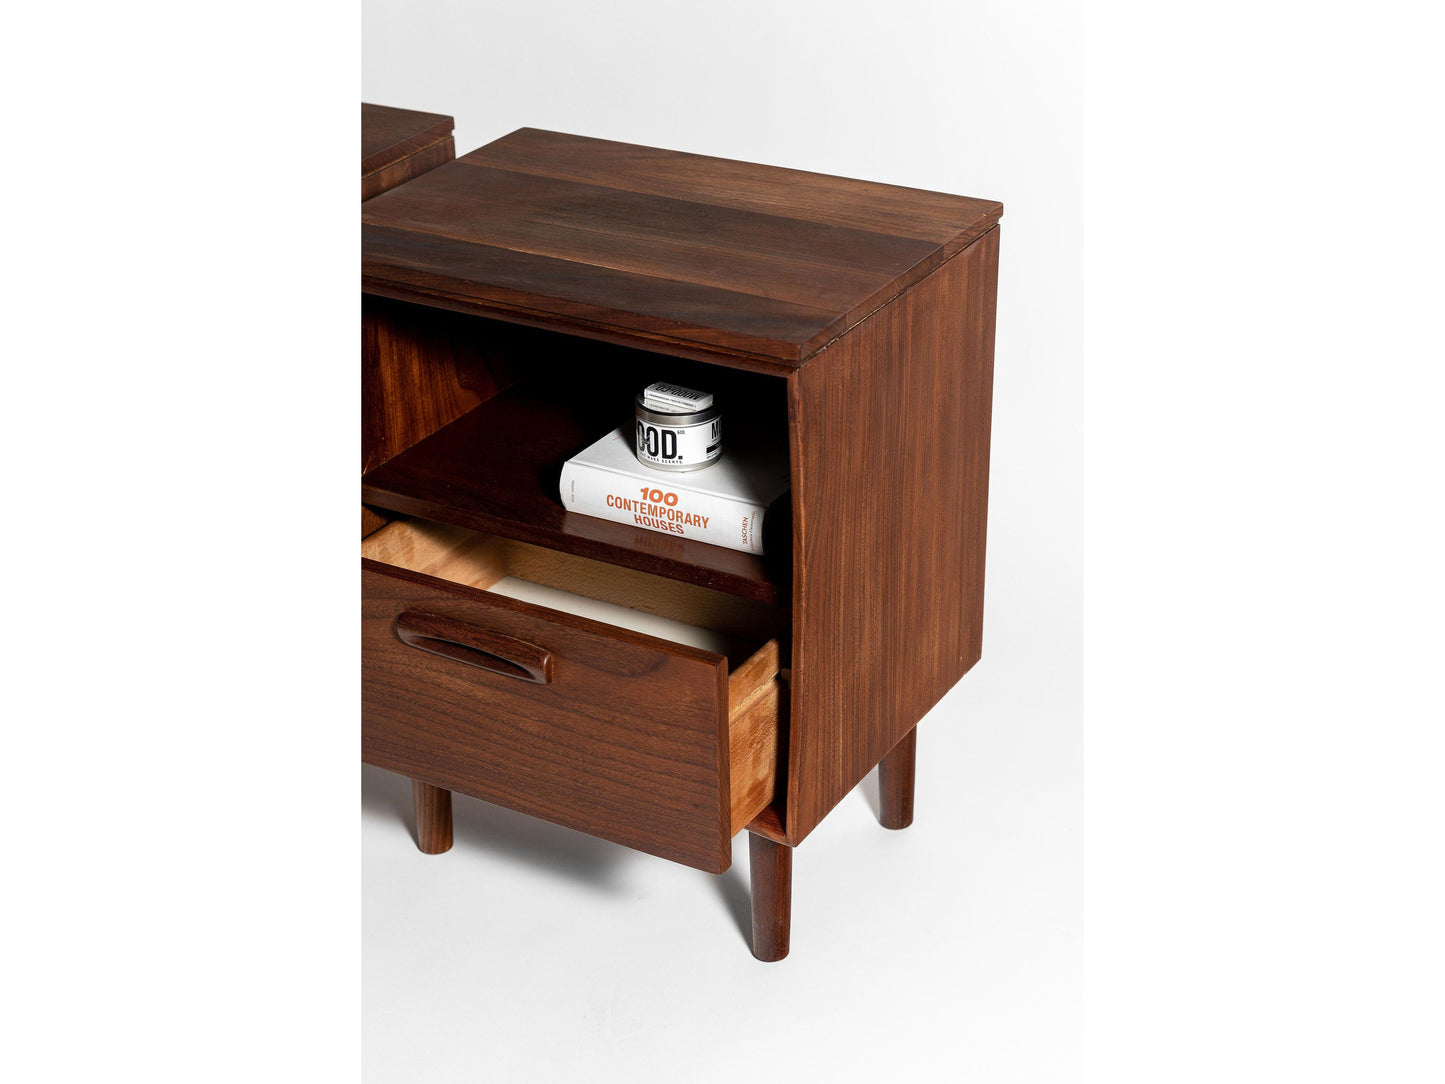 Pair of Bedside Tables by Jan Kuypers for Imperial